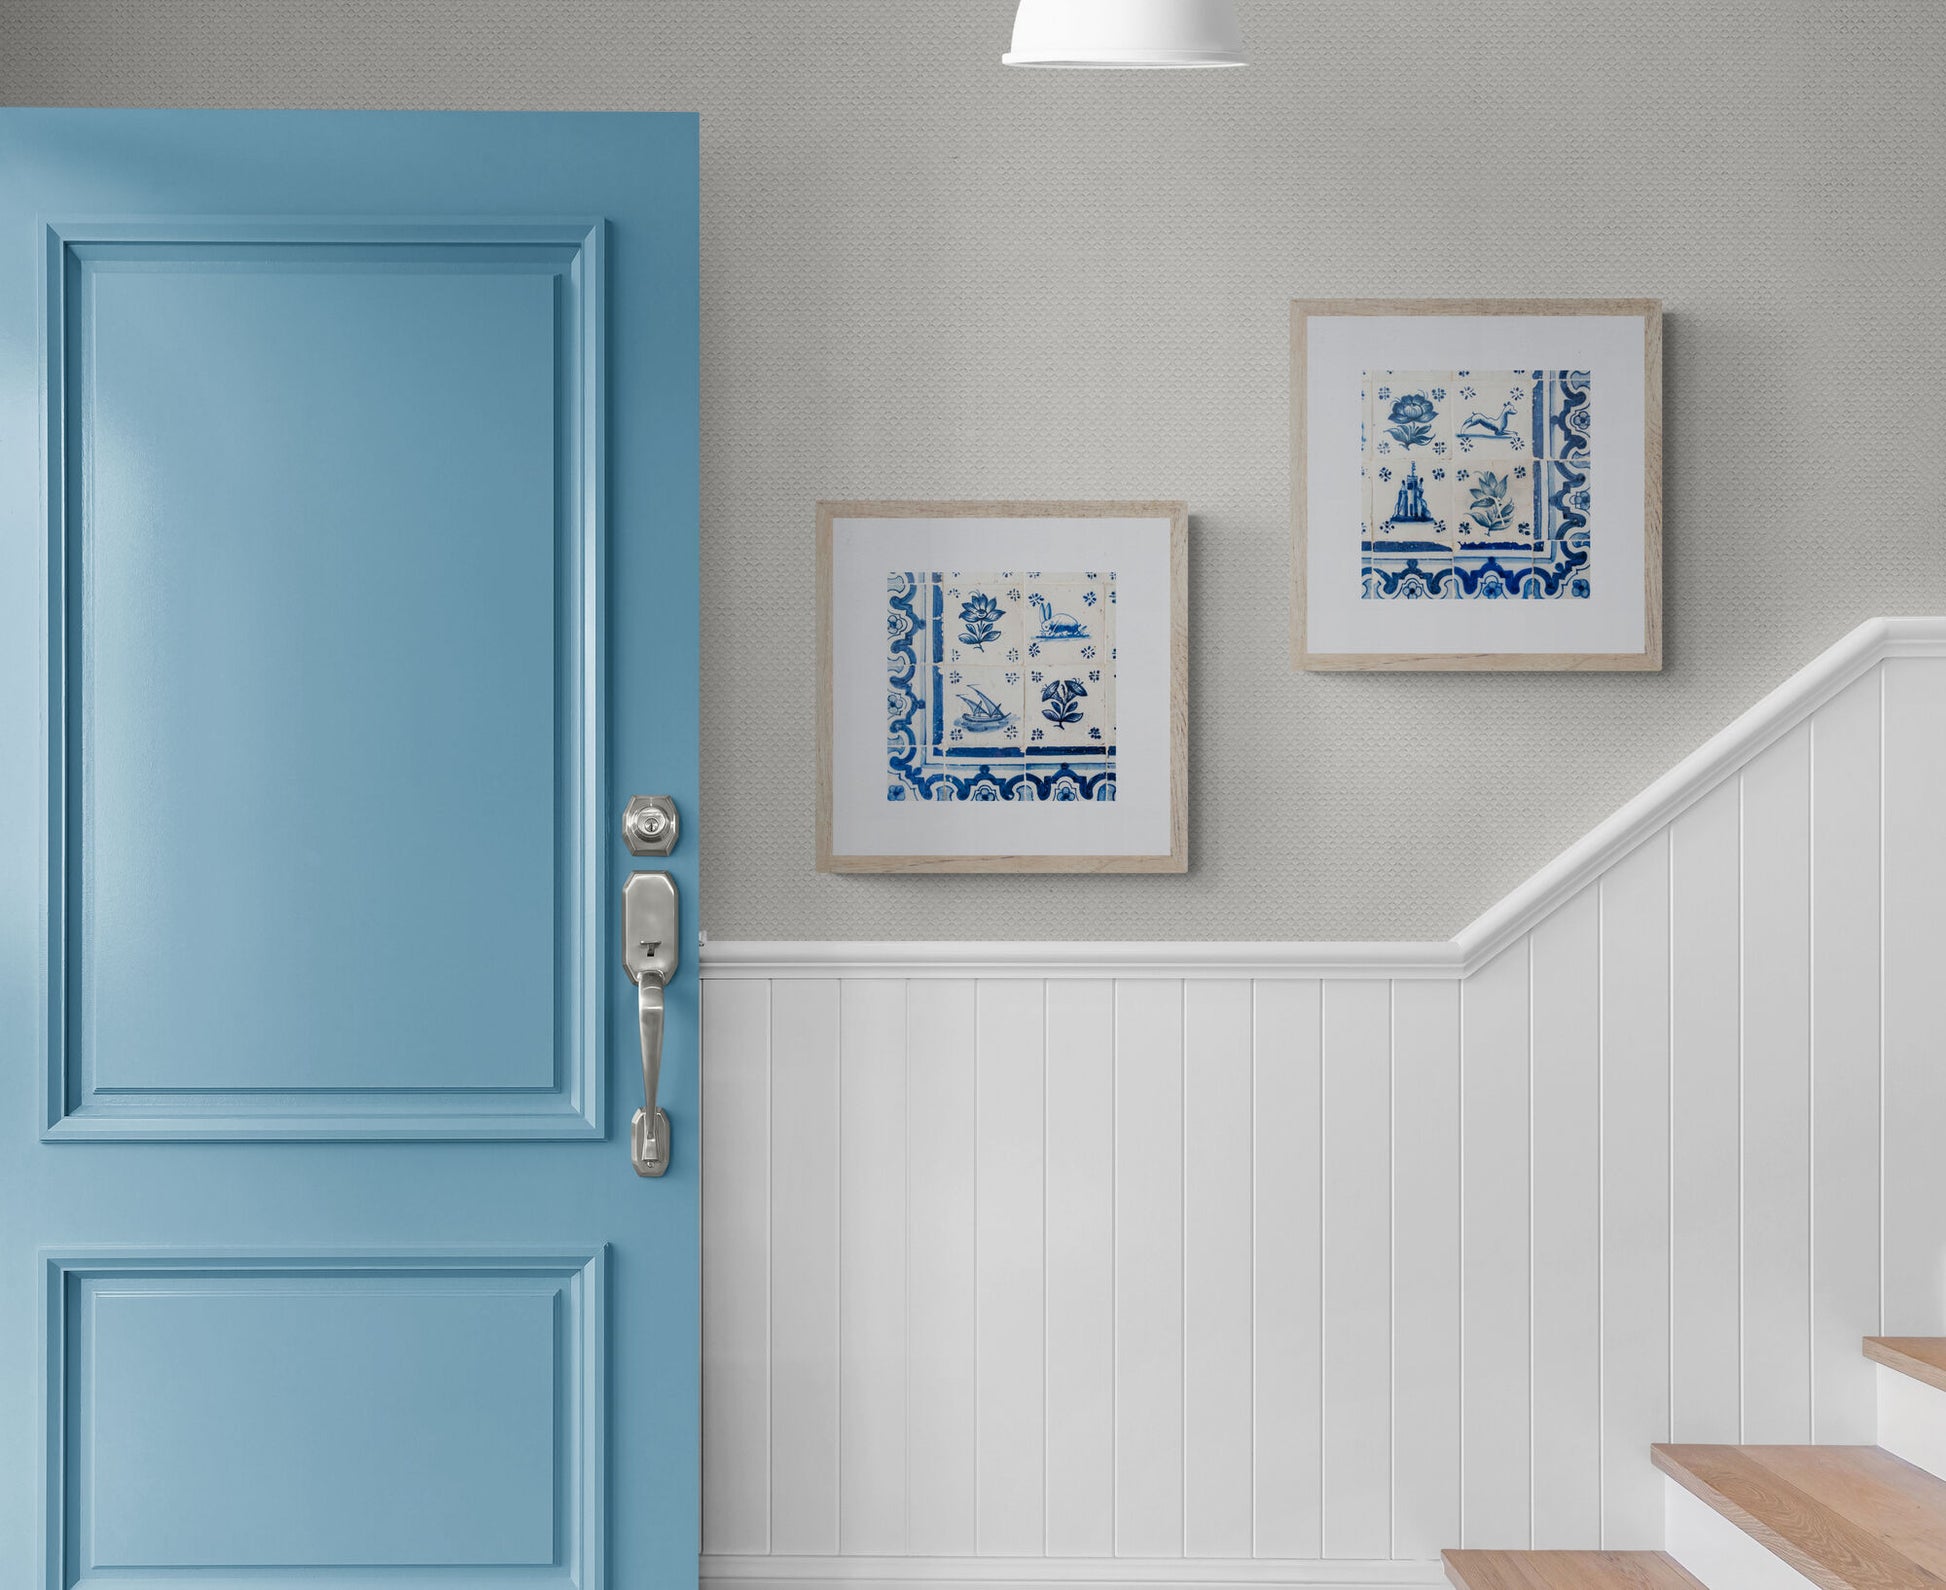 Two Square LIsbon Tile Photograph Prints in an Entryway